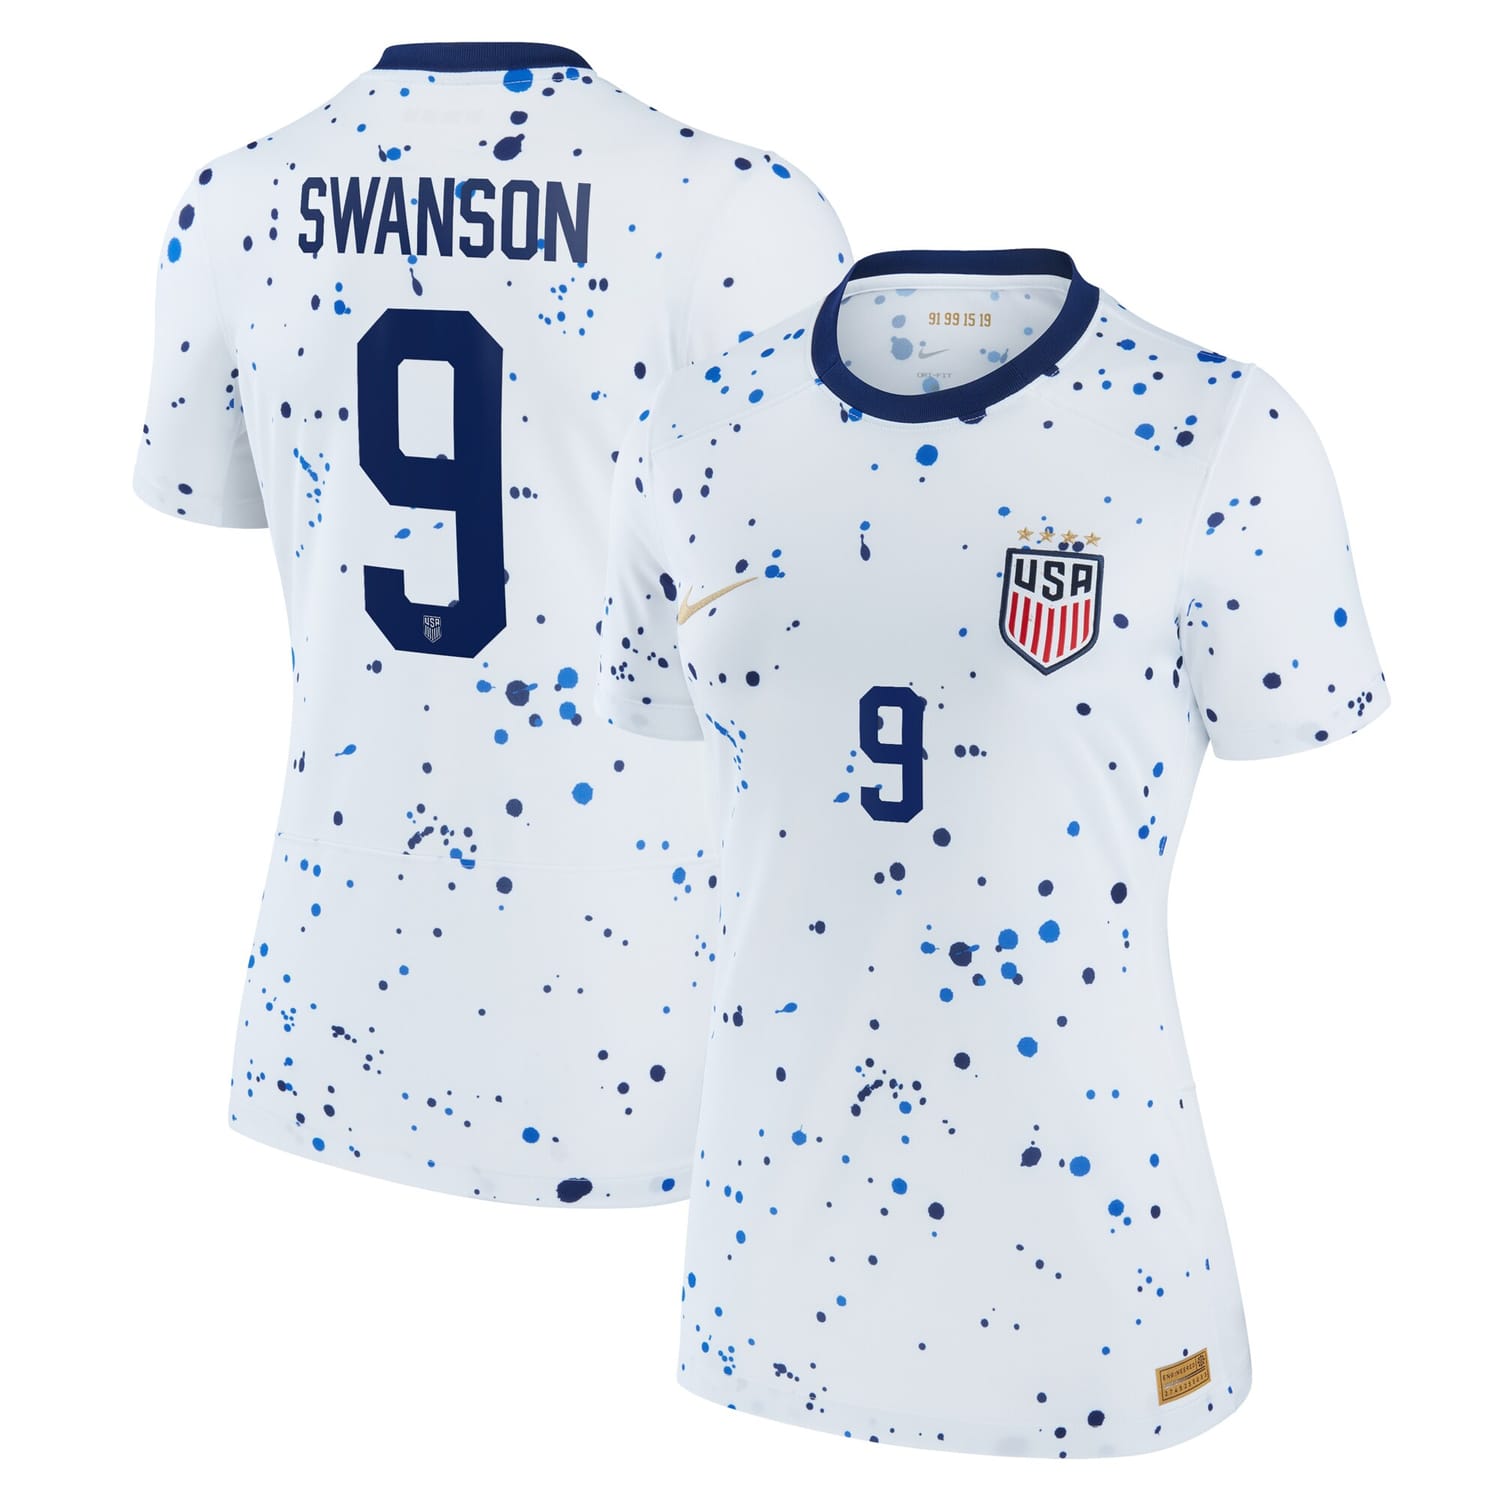 USWNT Home Jersey Shirt White 2023 player Mallory Swanson printing for Women